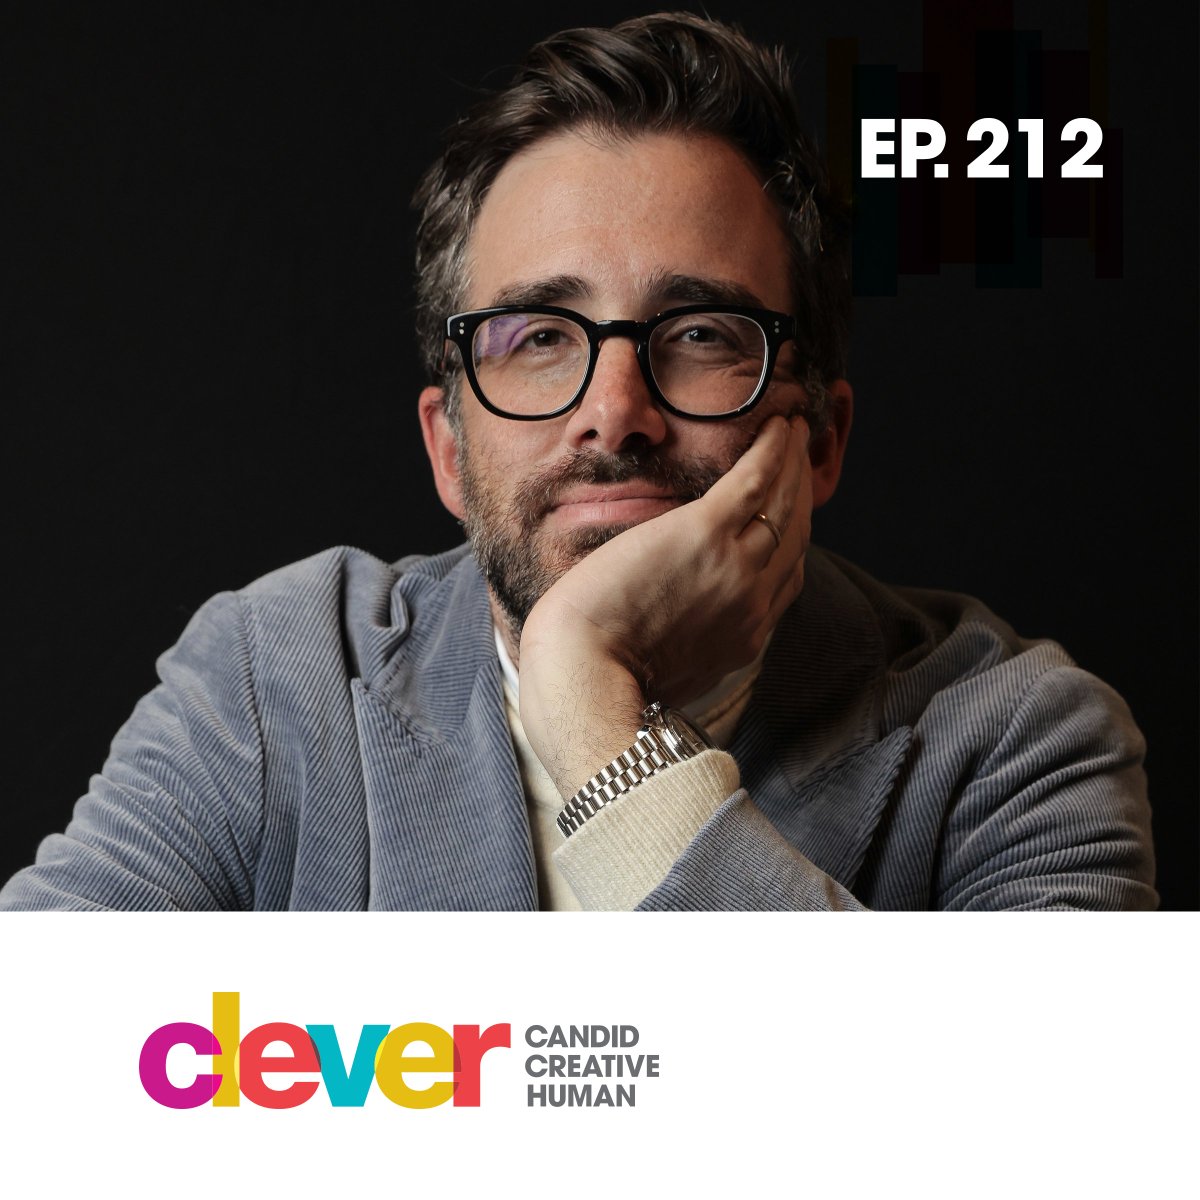 NEW EP! @Hodinkee's @benjaminclymer on Agency, Permanence, & the Talismans of Life⌚️In 2008 he started a tiny blog, HODINKEE, about watches that has now grown into a multi-channel platform that has transformed the world of luxury watches. +@amydevers 🎧👉cleverpodcast.com/blog/ben-clyme…